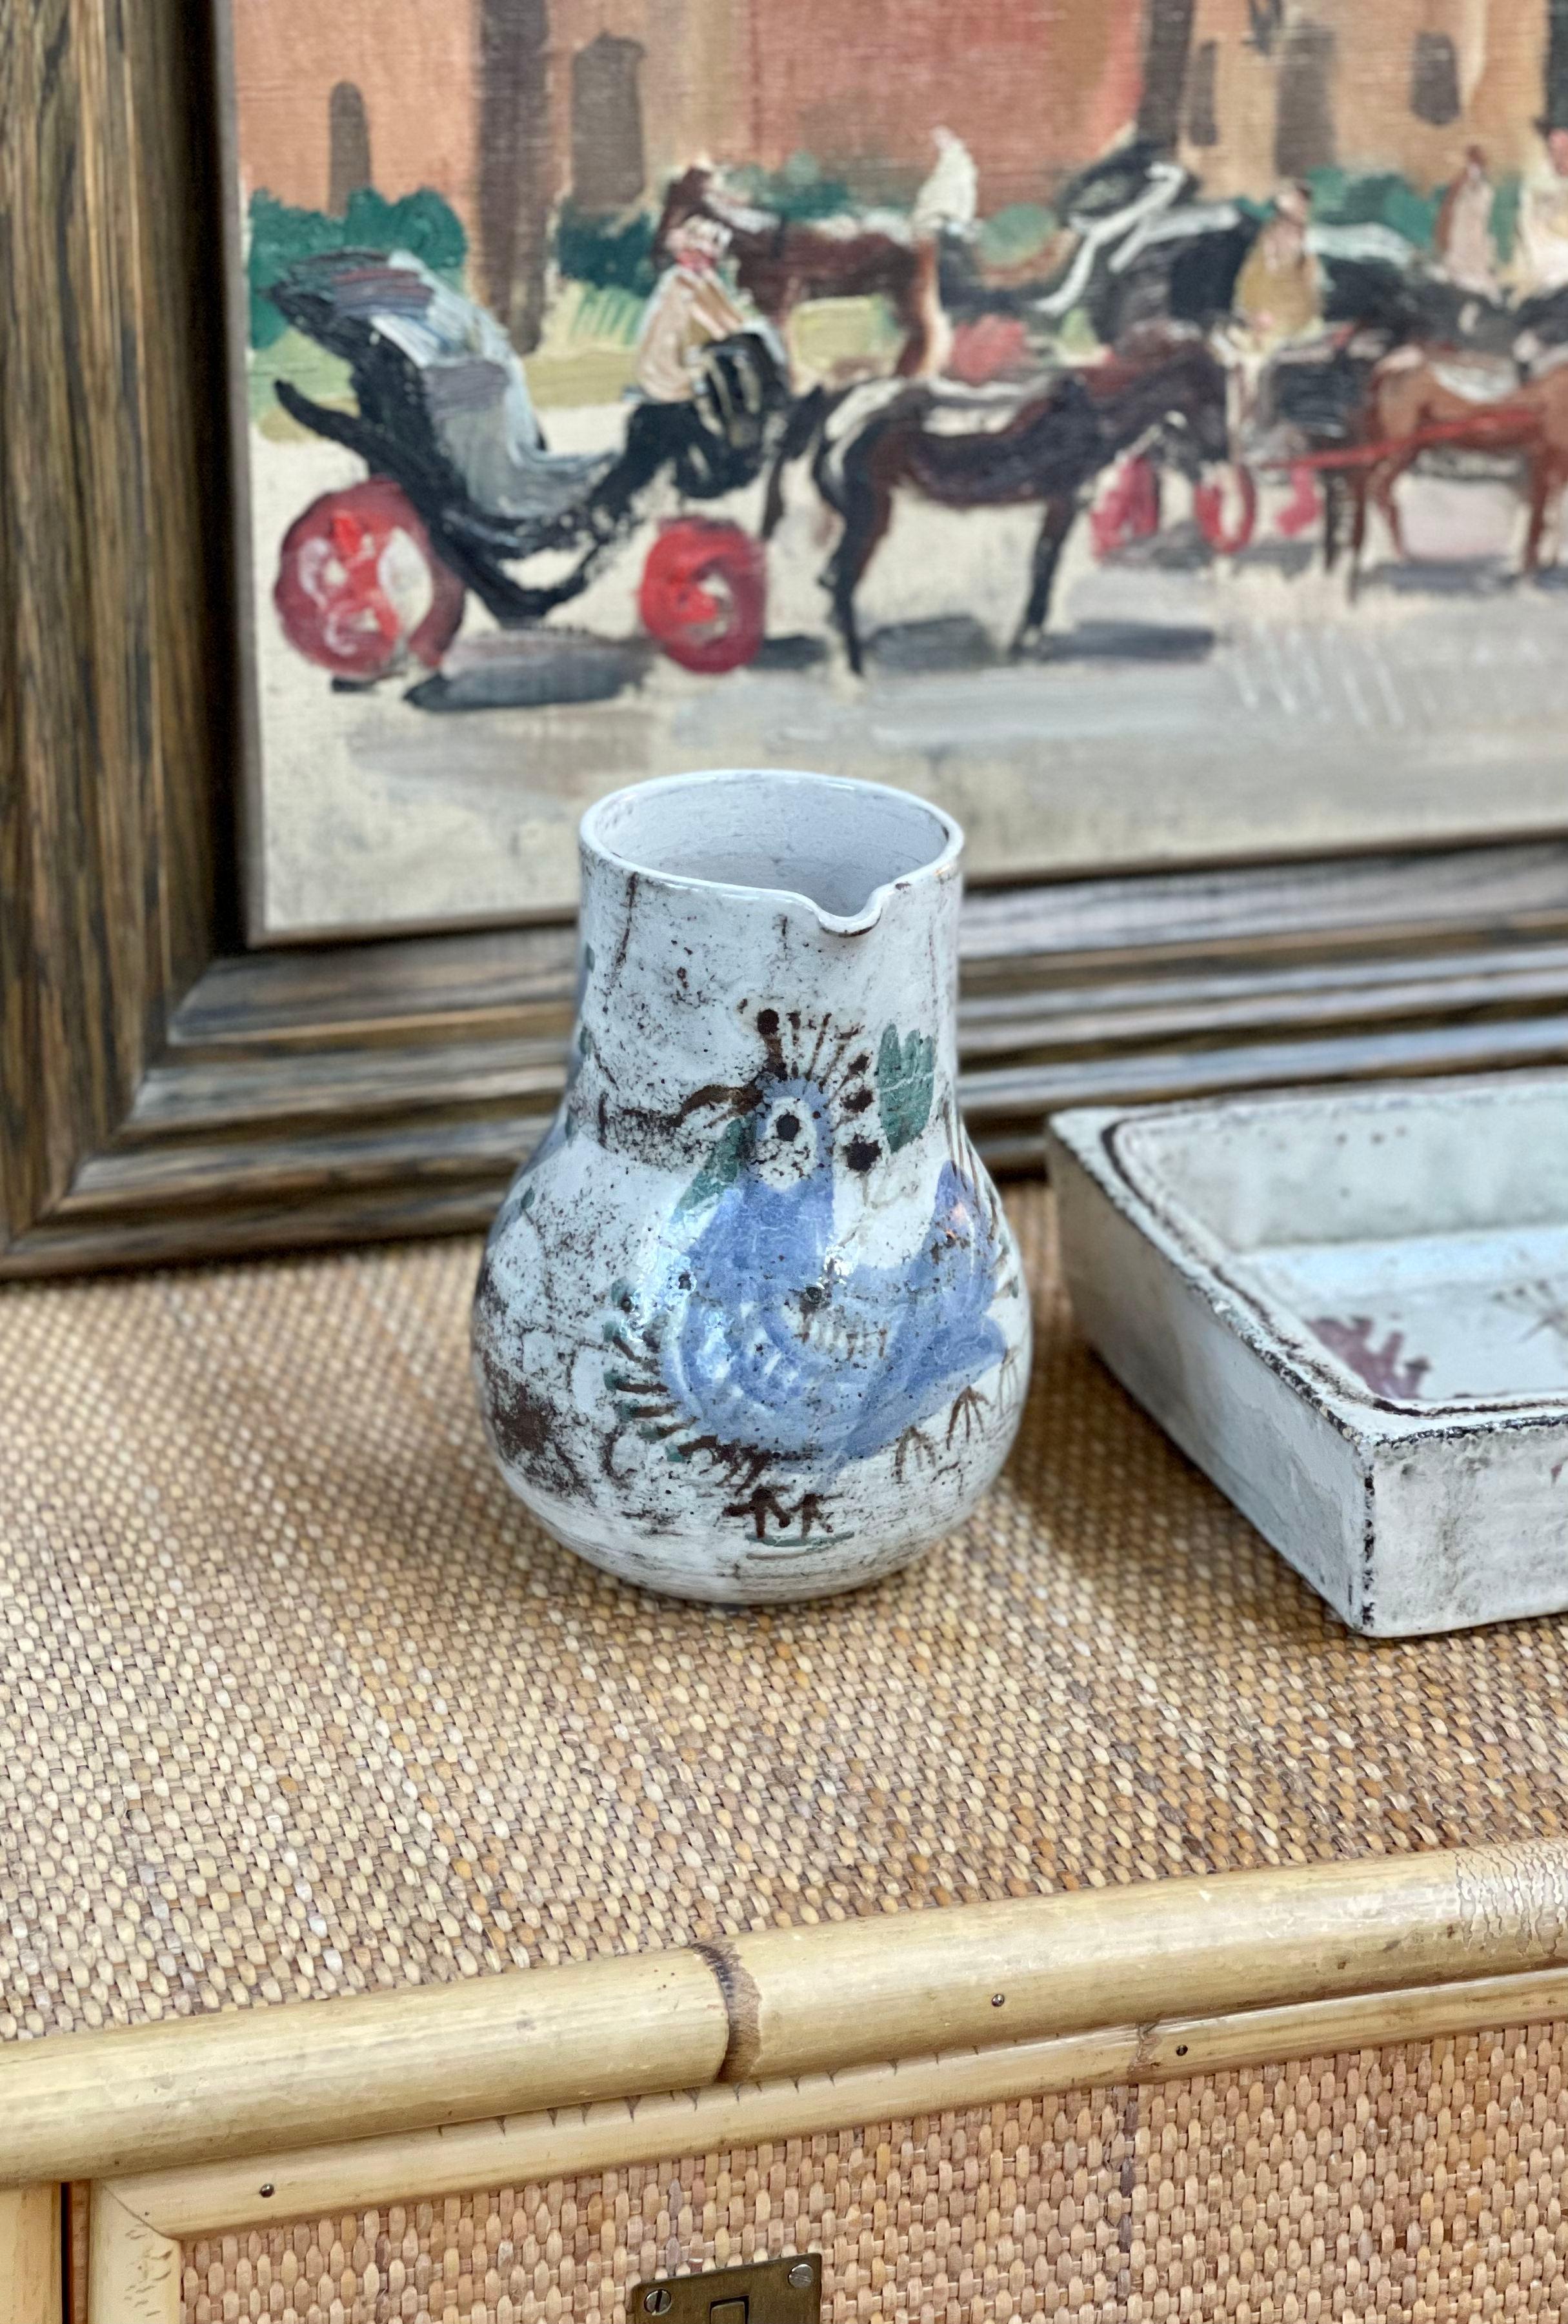 Vintage French ceramic pitcher by Gustave Reynaud - Le Mûrier (circa 1960s). A delightful ceramic piece with graceful handle in a hazy, creamy white glaze as base. The French rooster is decorated on the body with shrubbery and plants throughout.